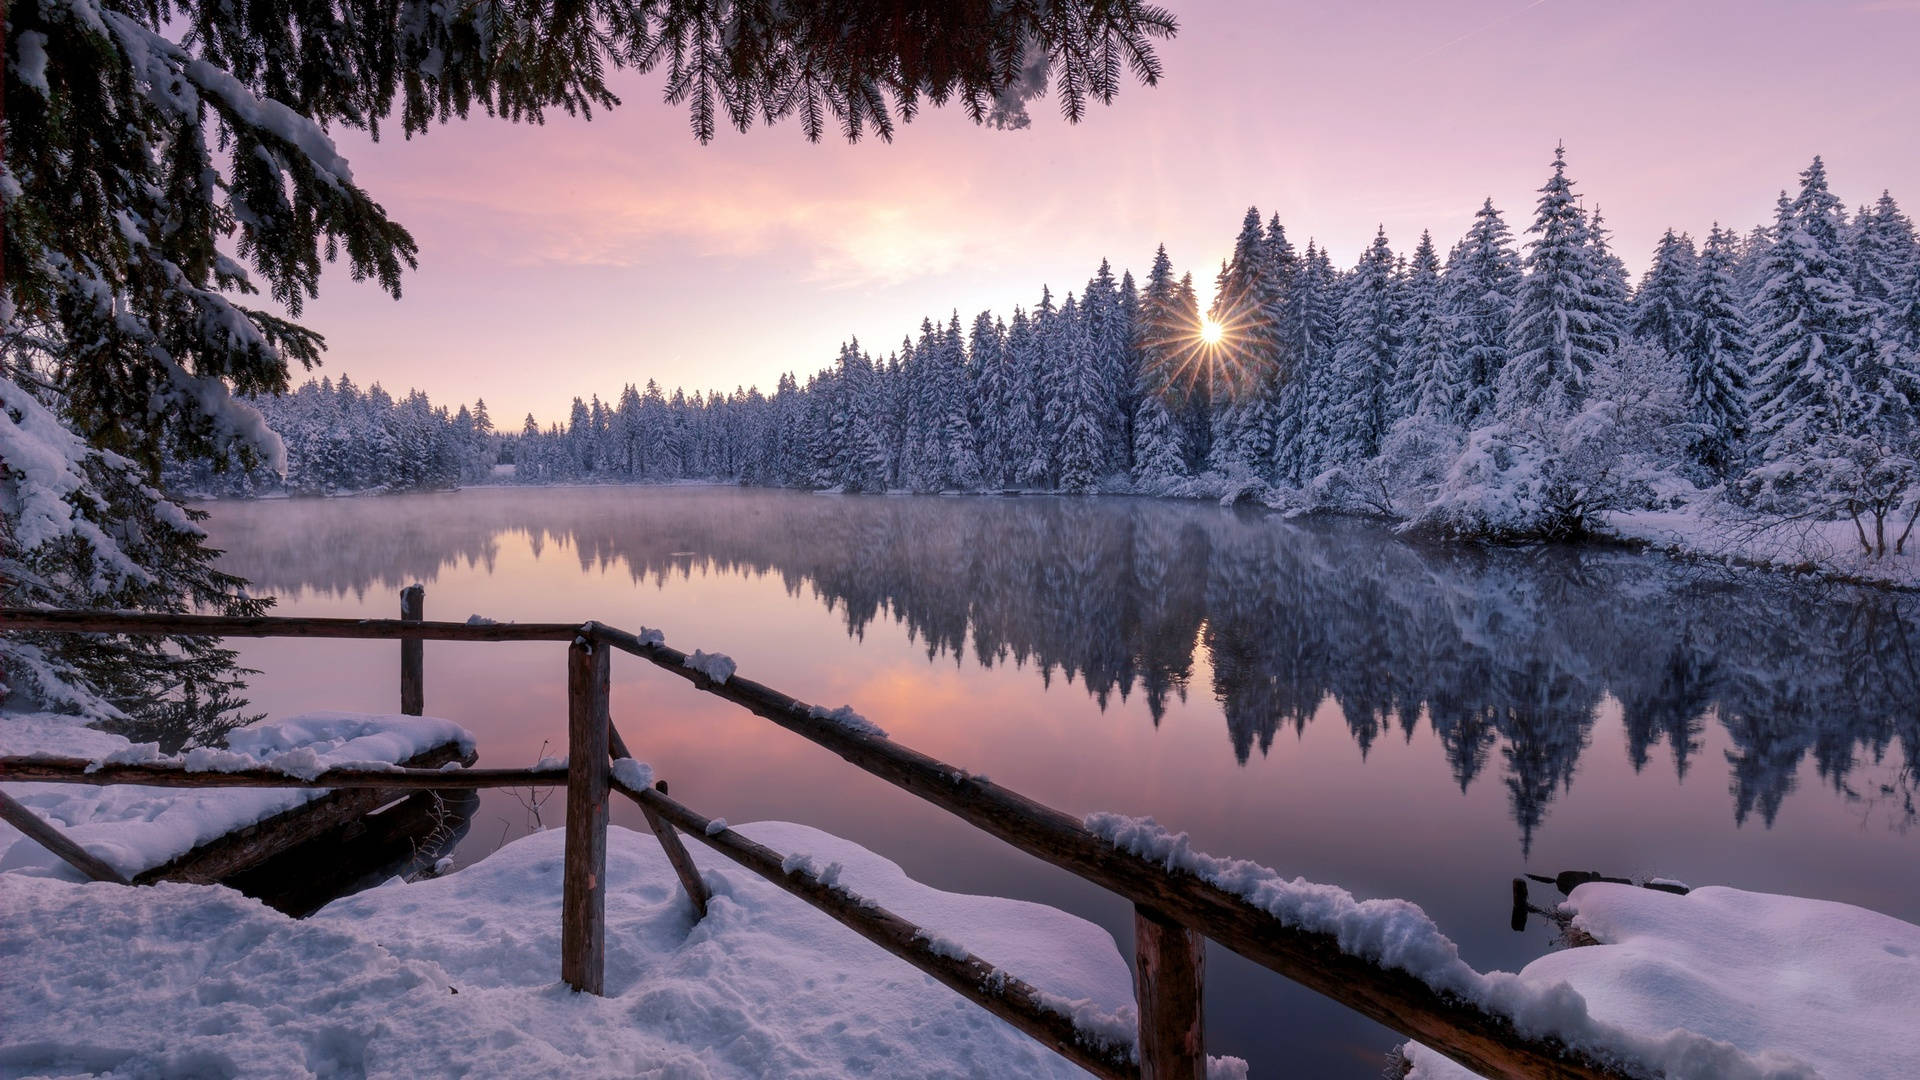 A snowy lake with trees in the background - Winter, snow, lake